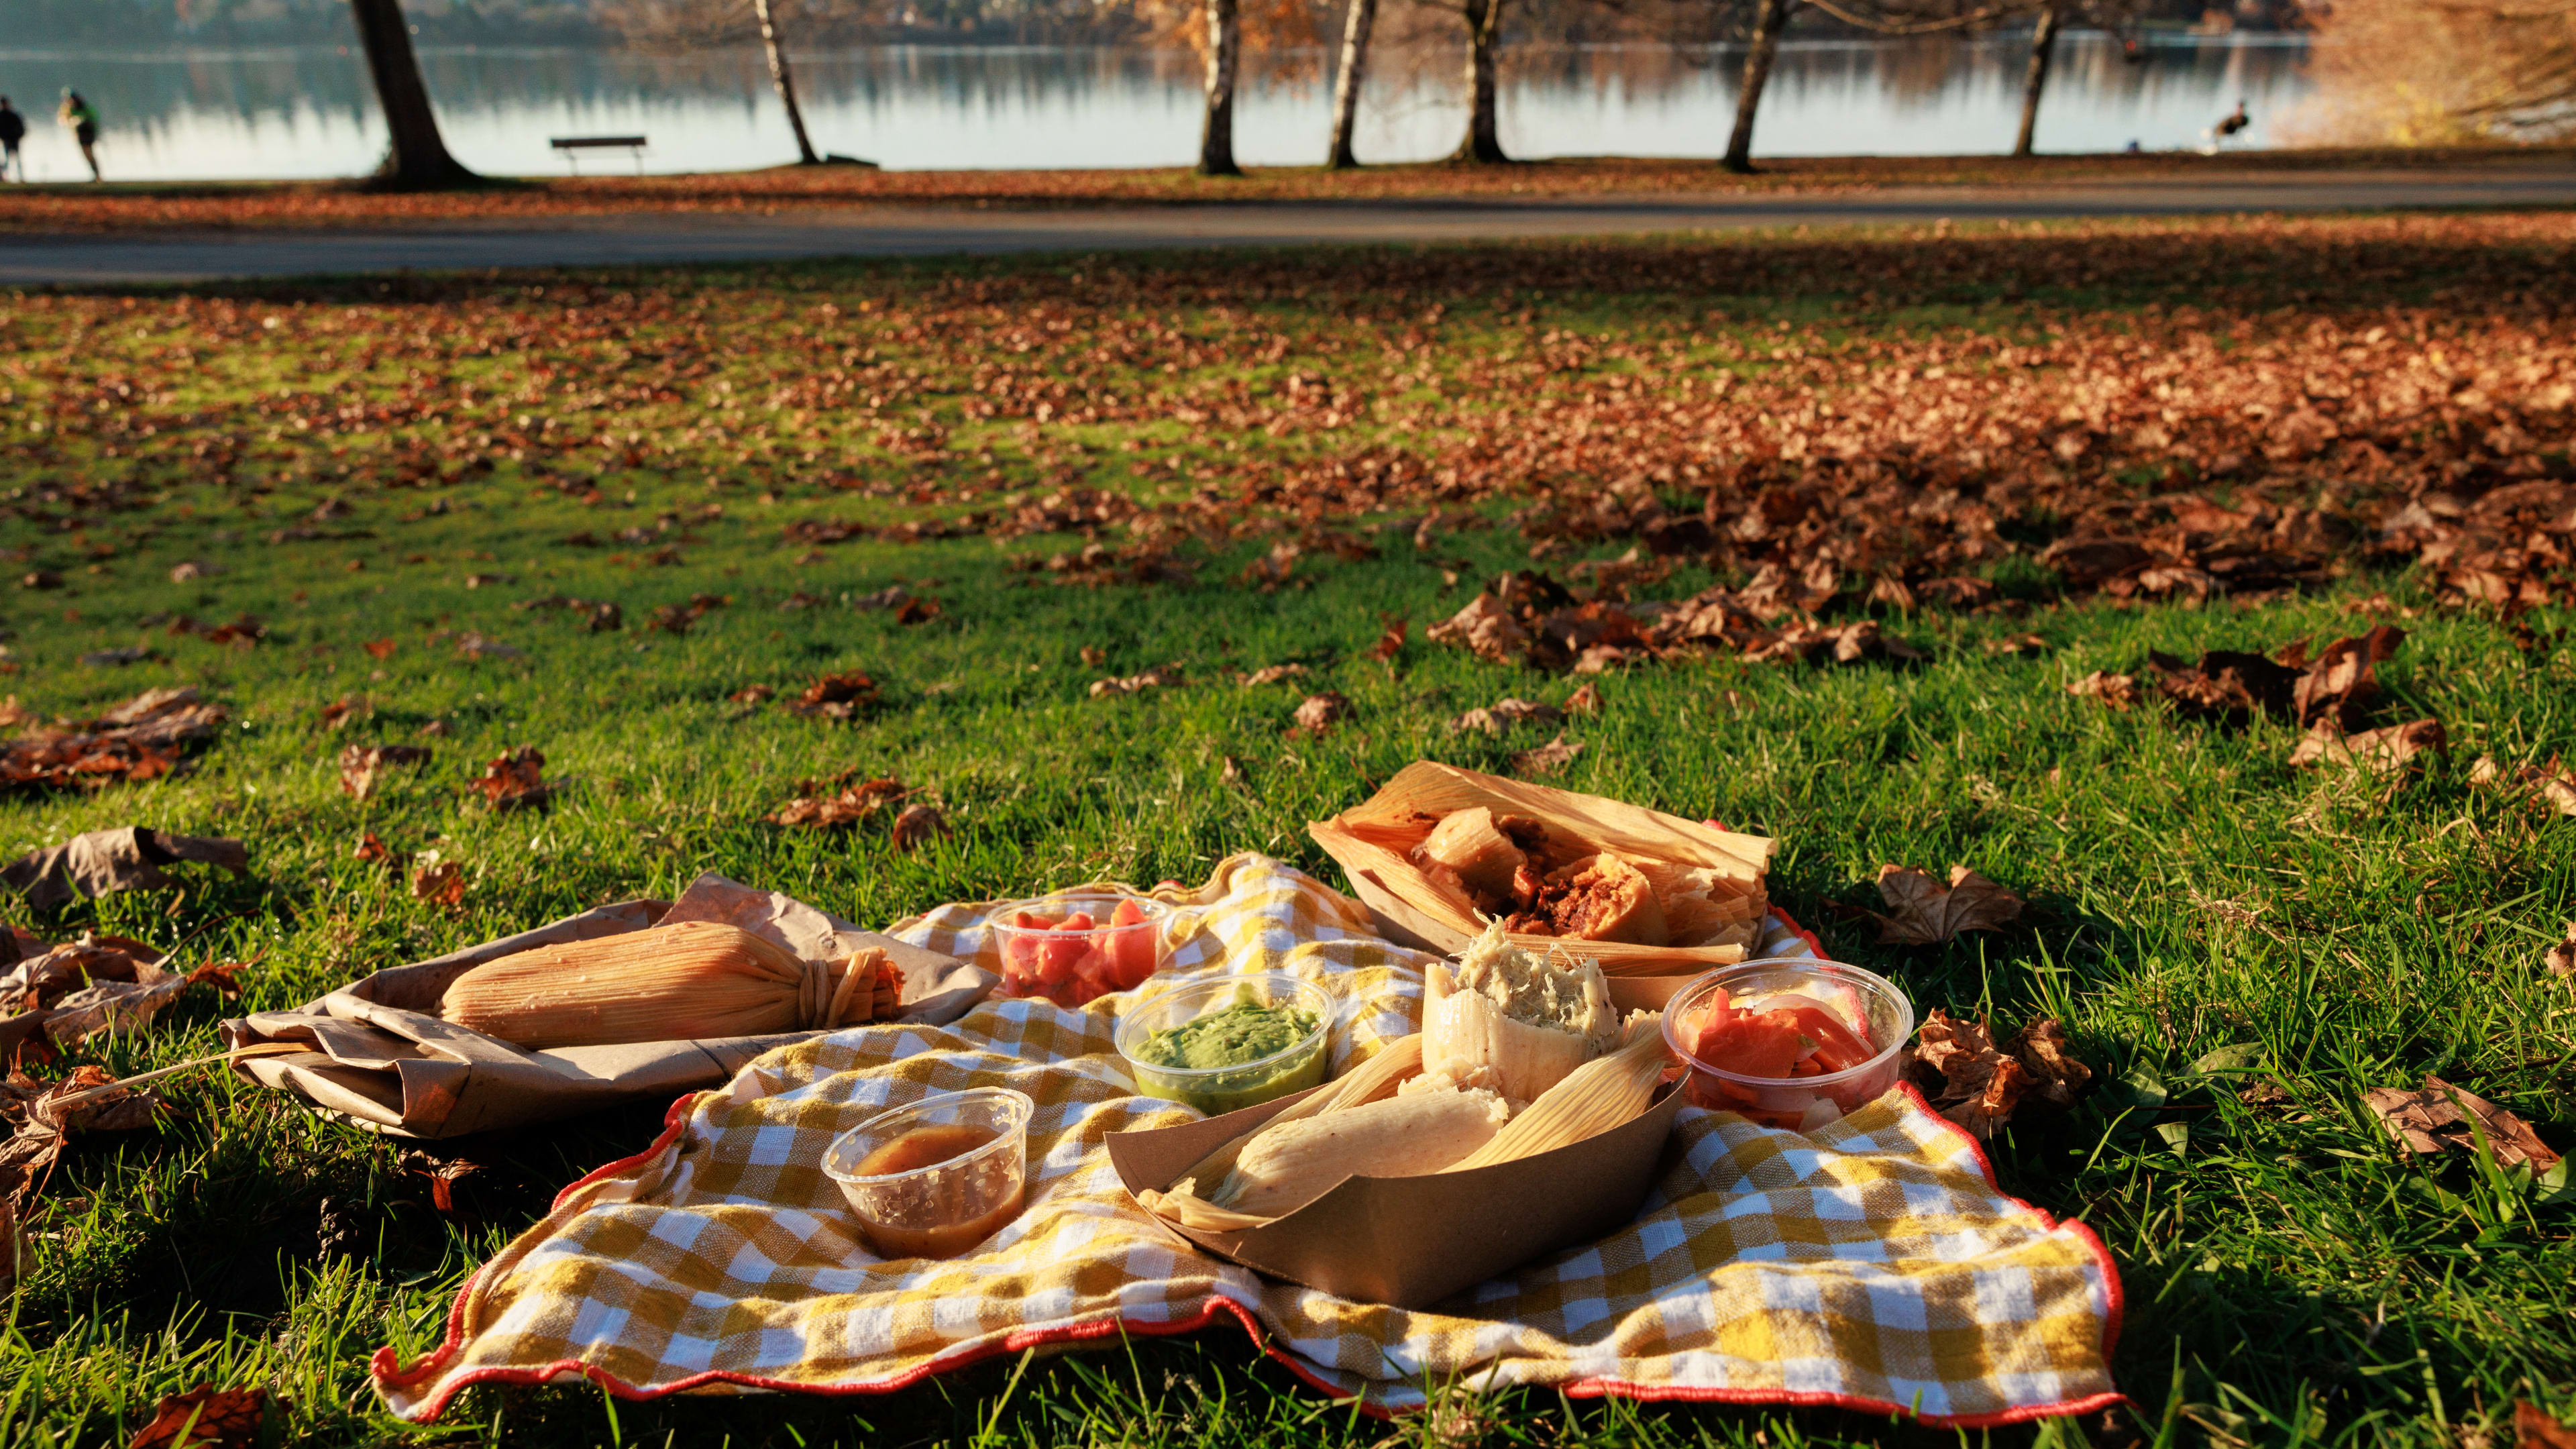 Picnic blanket with tamales at park with fallen leaves.